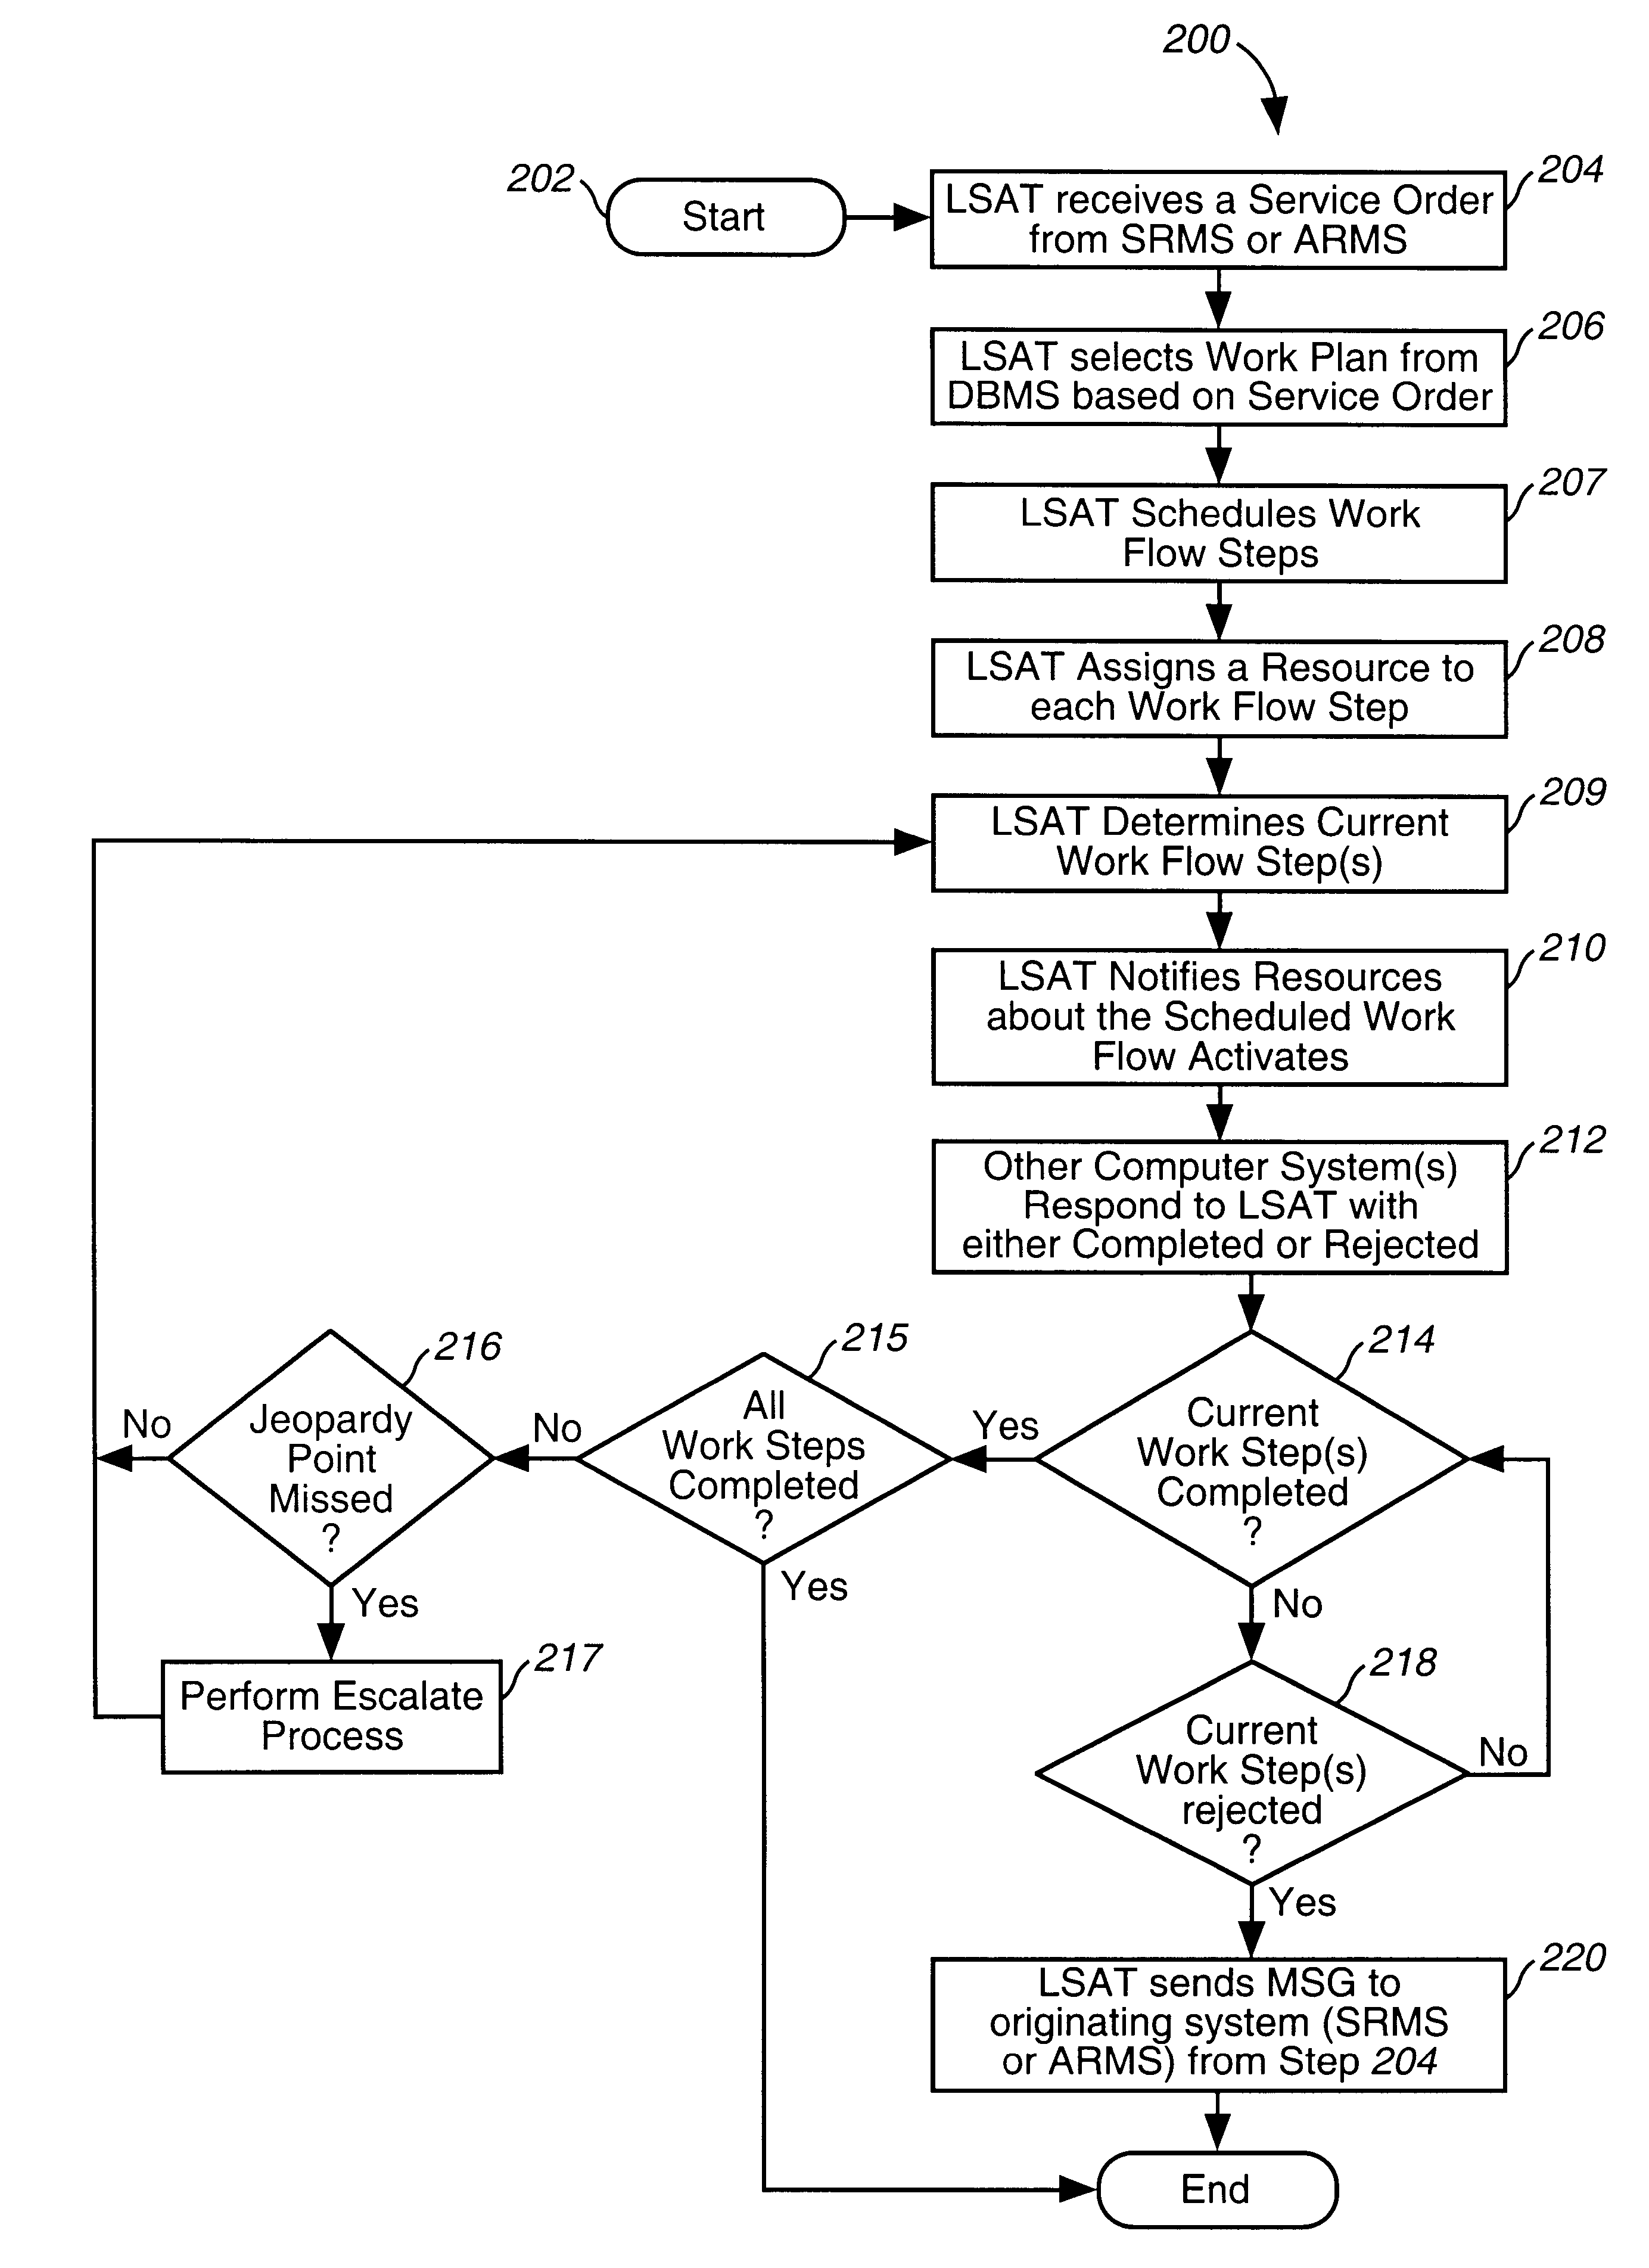 System and method for managing the workflow for processing service orders among a variety of organizations within a telecommunications company